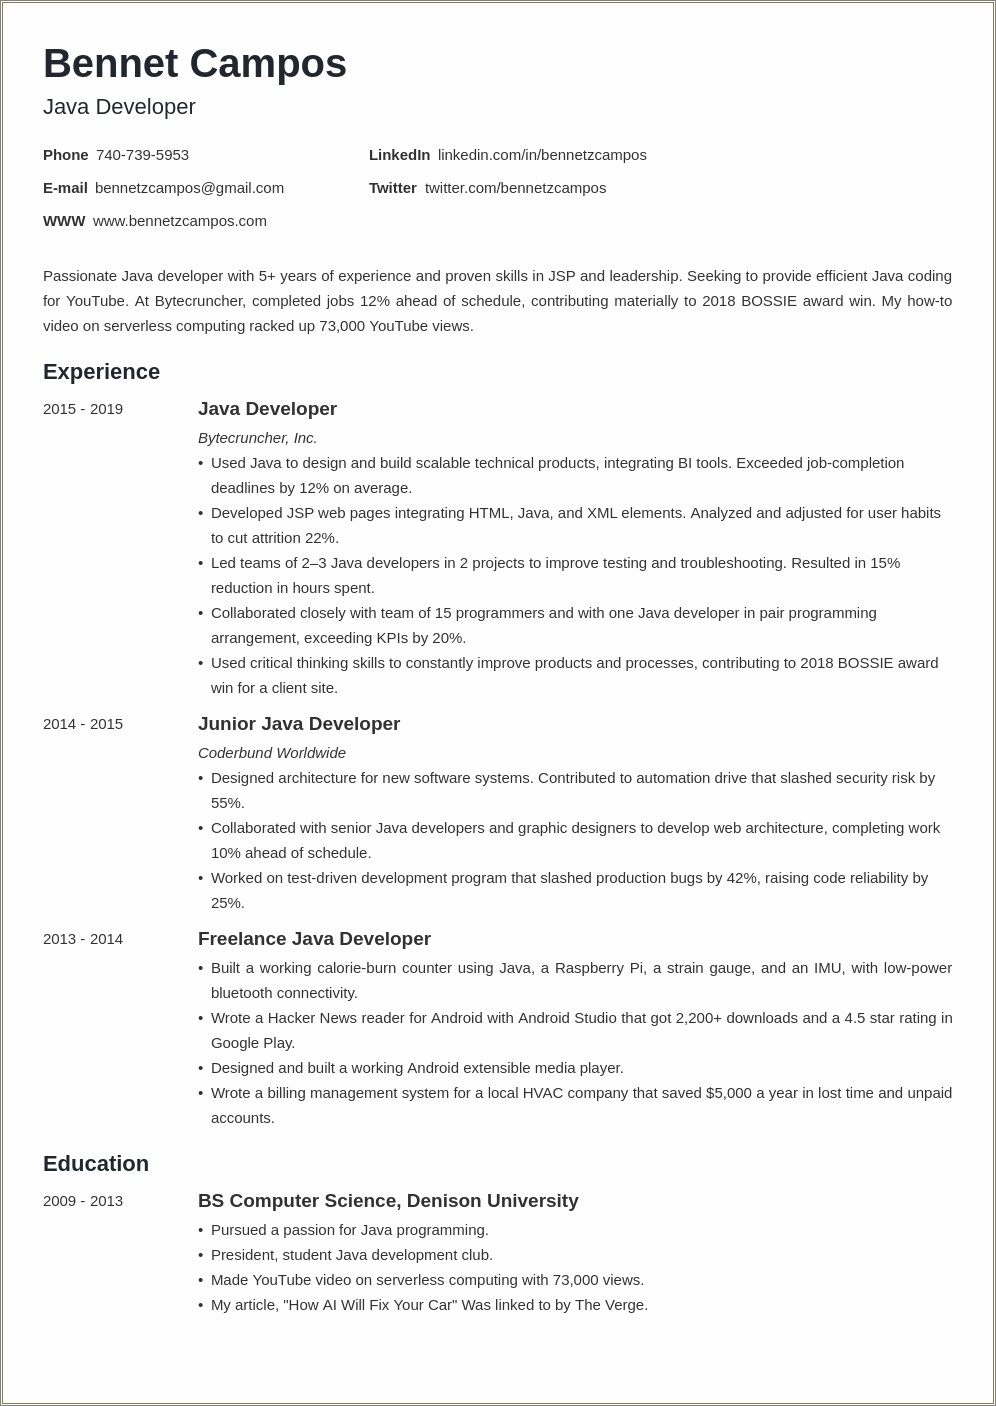 2 Year Experience Resume Format For Developer